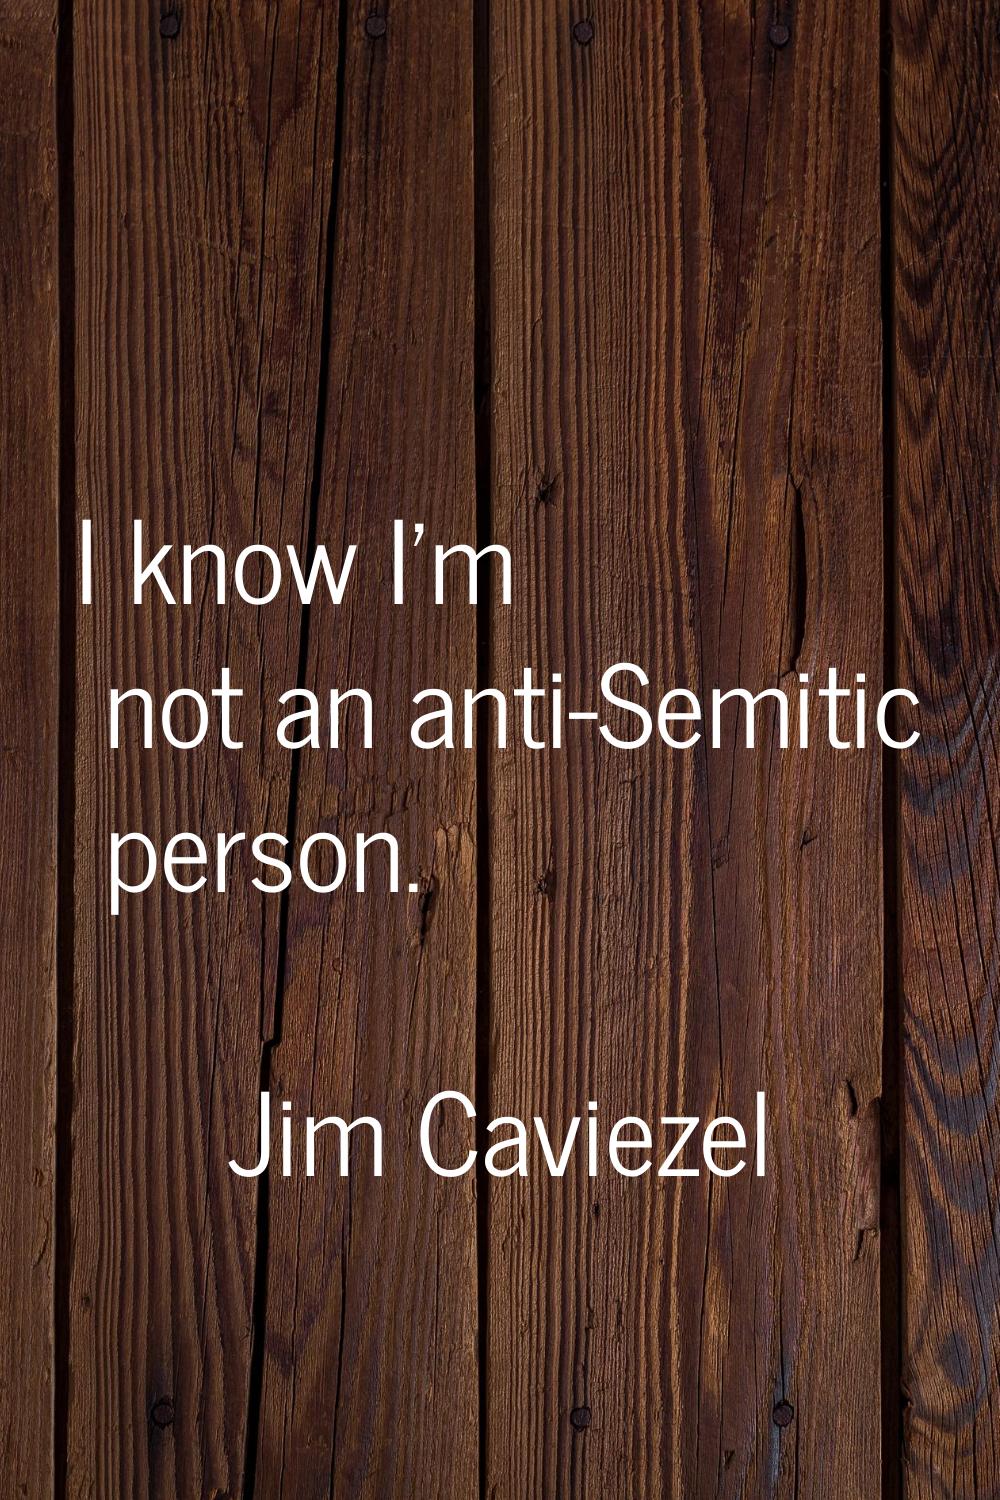 I know I'm not an anti-Semitic person.